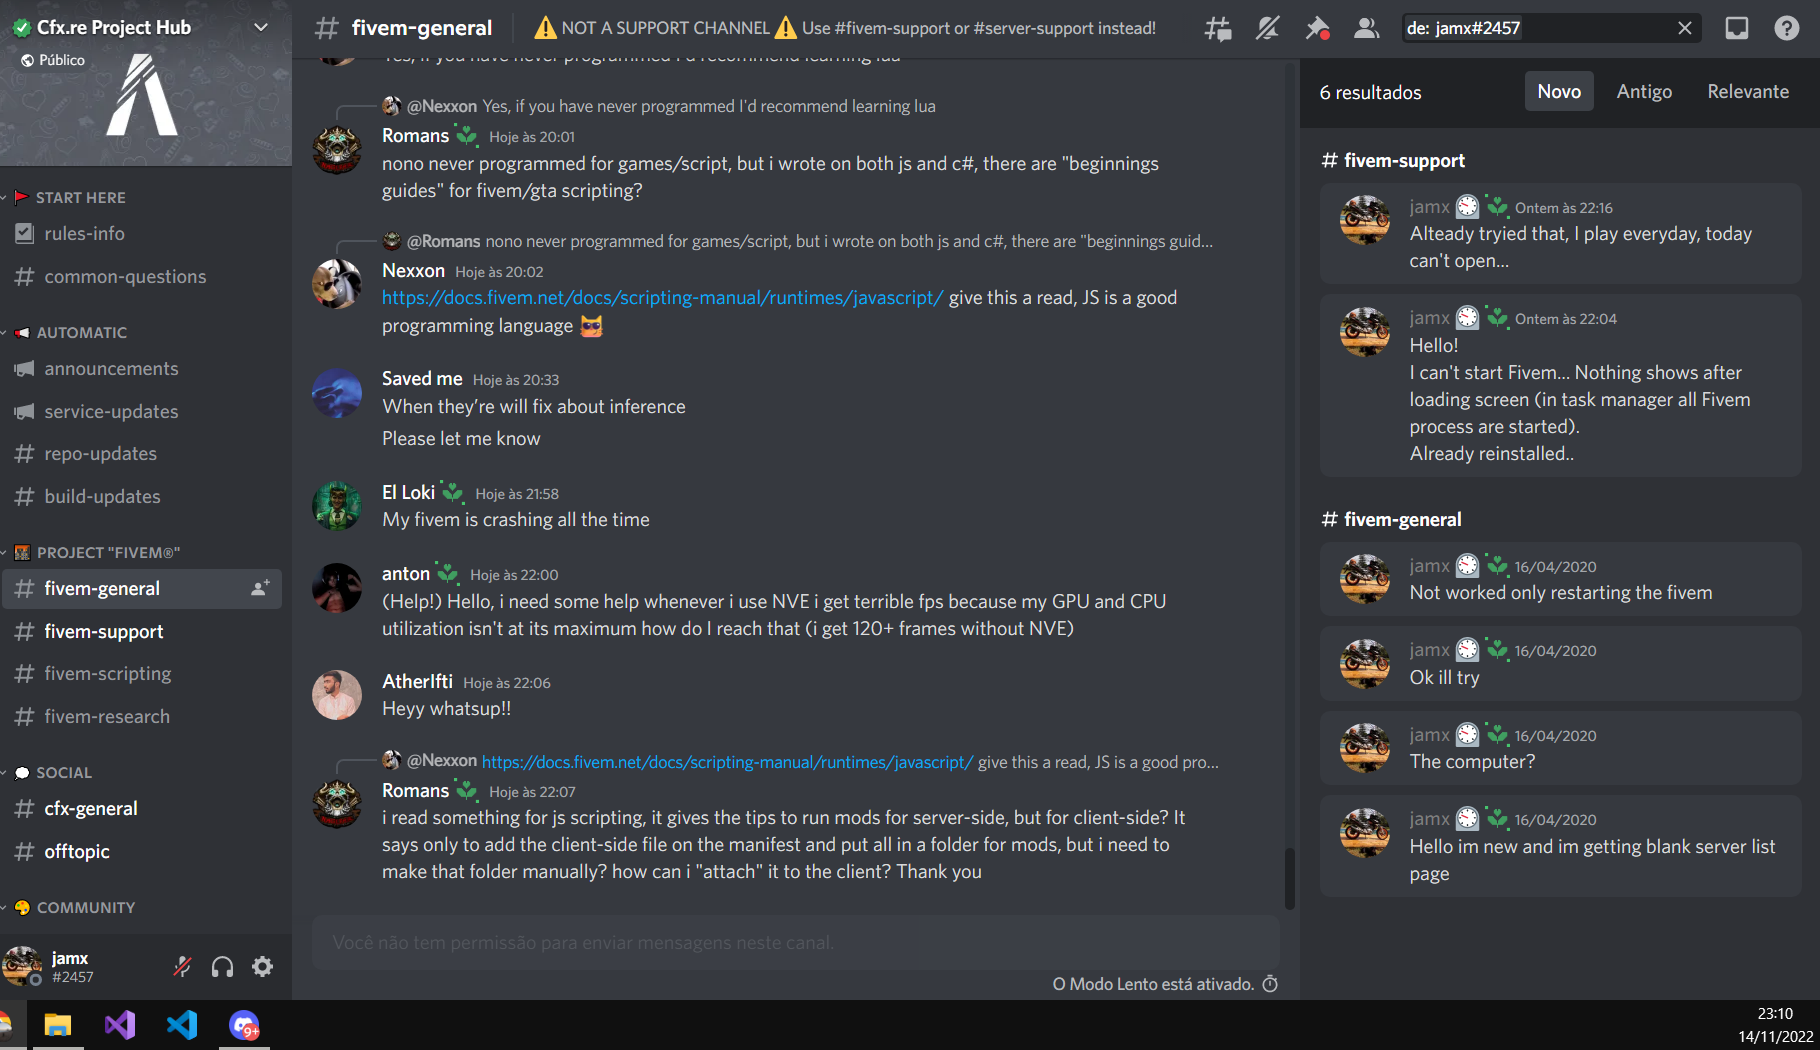 FiveM Crashing(Discord and Background too) - FiveM Client Support - Cfx.re  Community